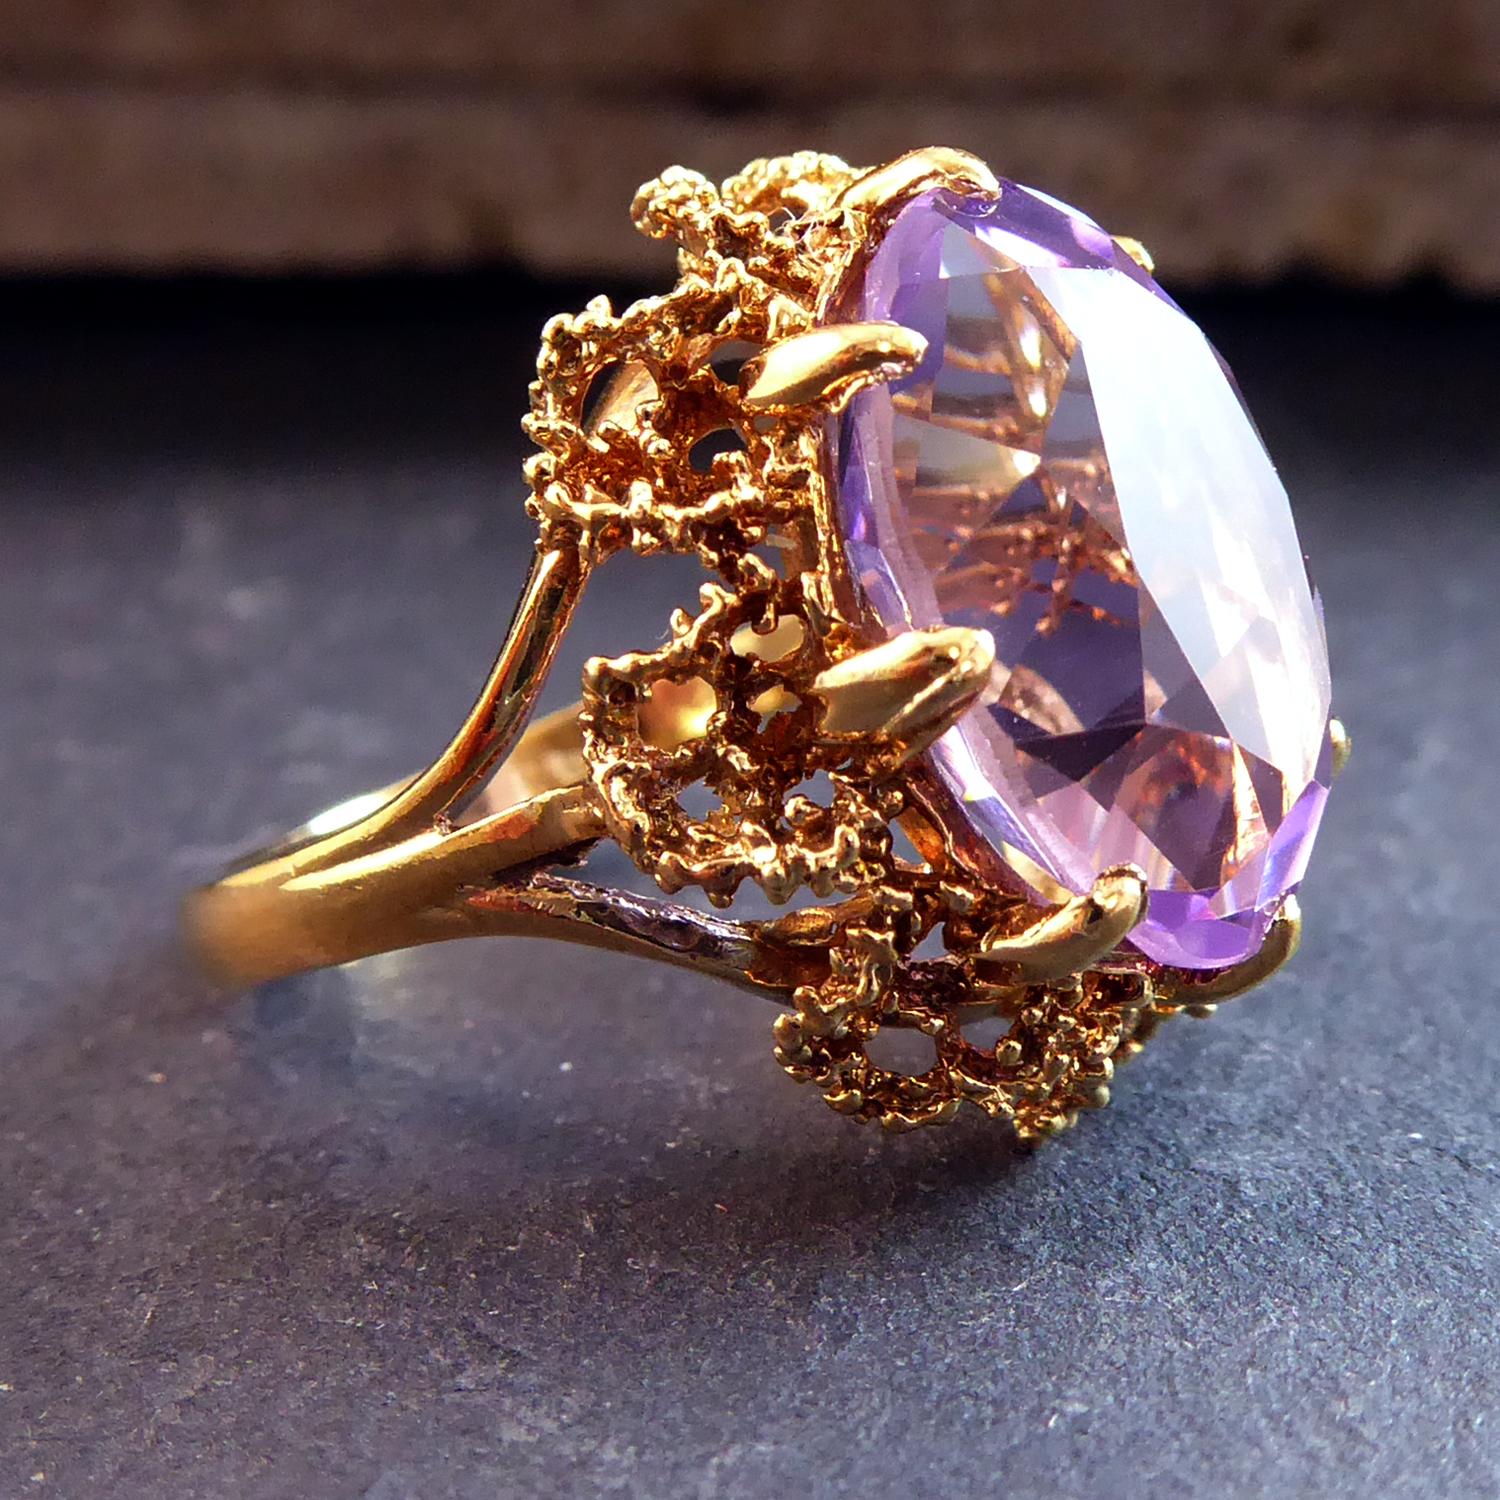 Vintage amethyst cocktail ring set with an oval faceted amethyst measuring approx. 0.63